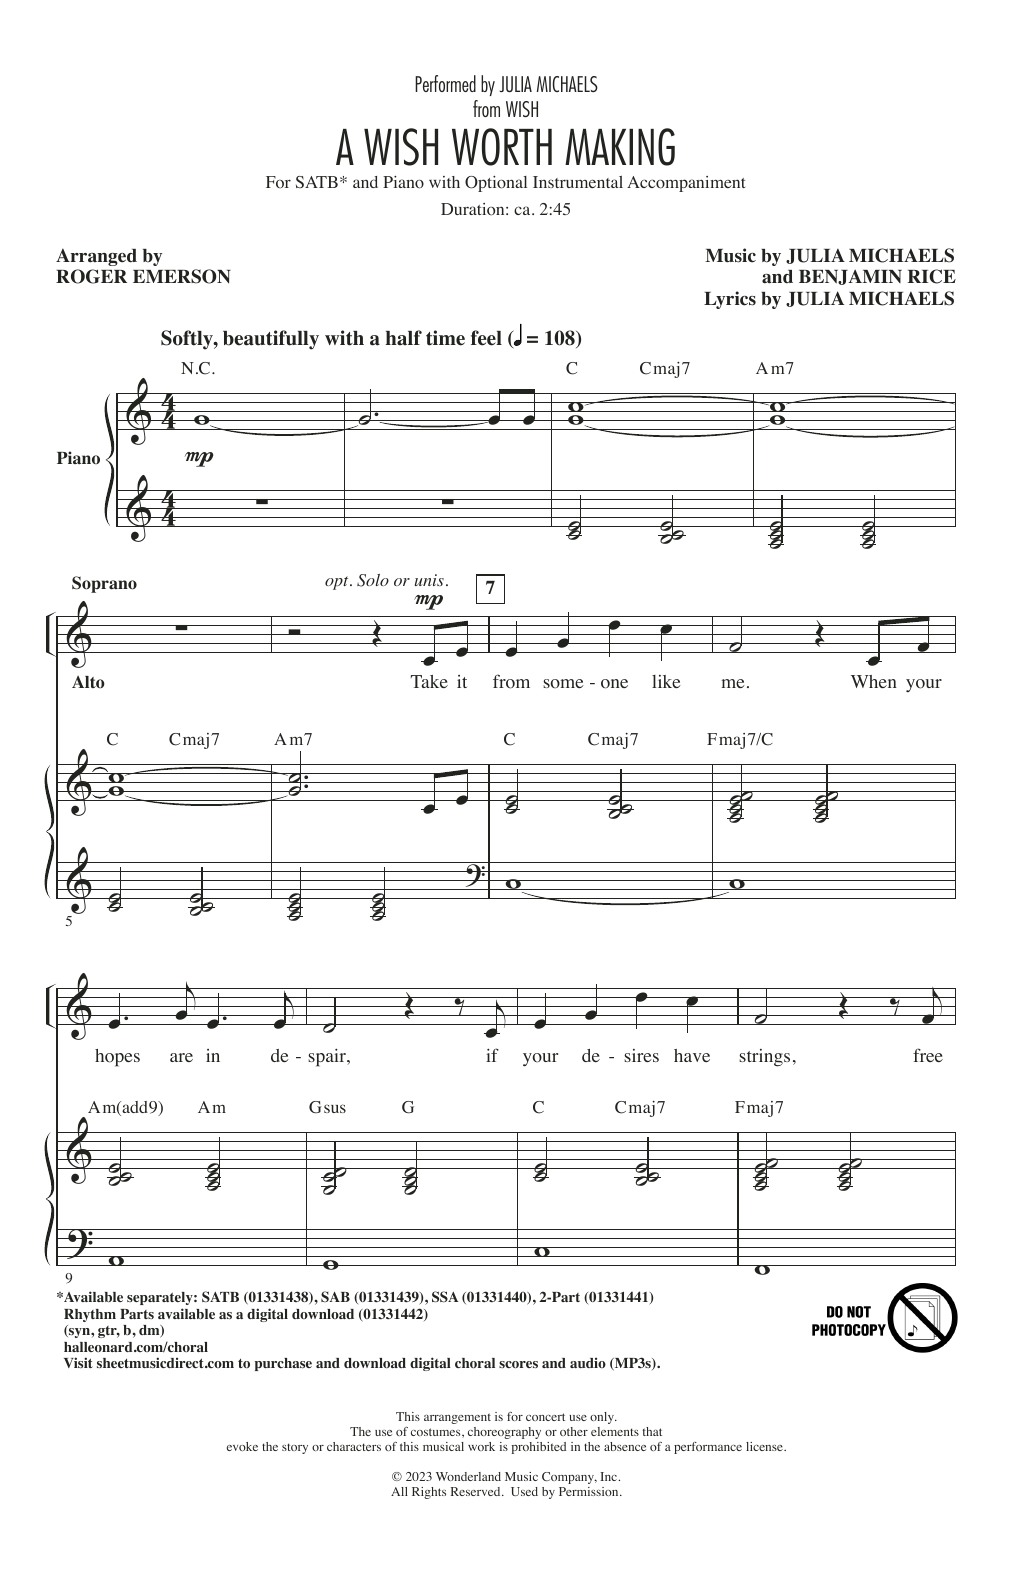 Julia Michaels A Wish Worth Making (from Wish) (arr. Roger Emerson) sheet music notes printable PDF score